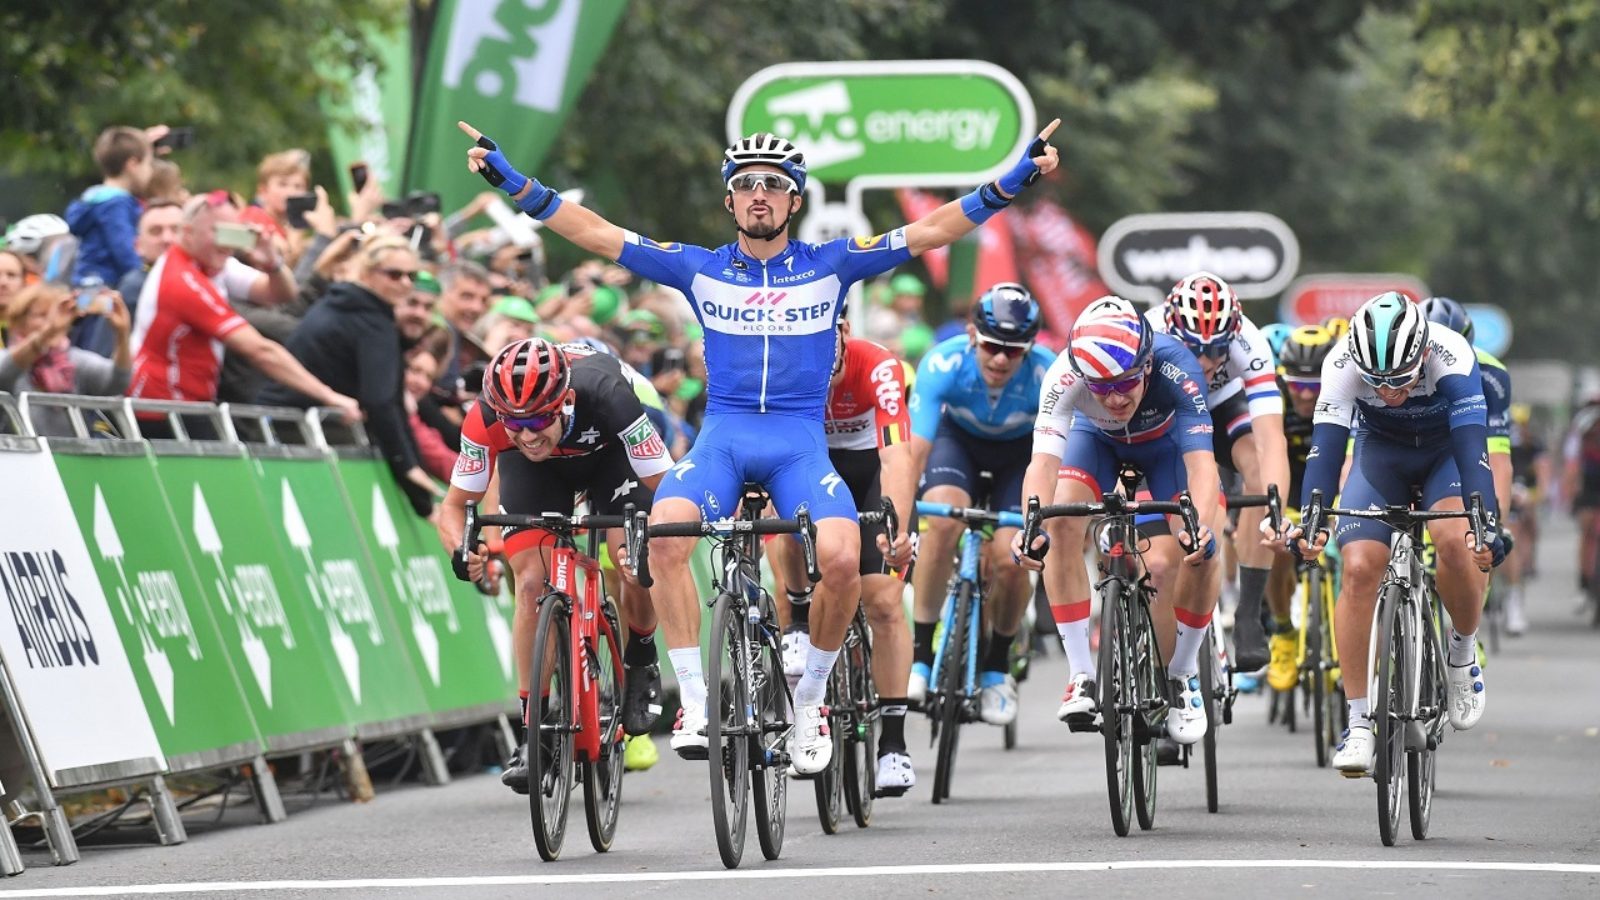 World champion Julian Alaphilippe returning to the Tour of Britain